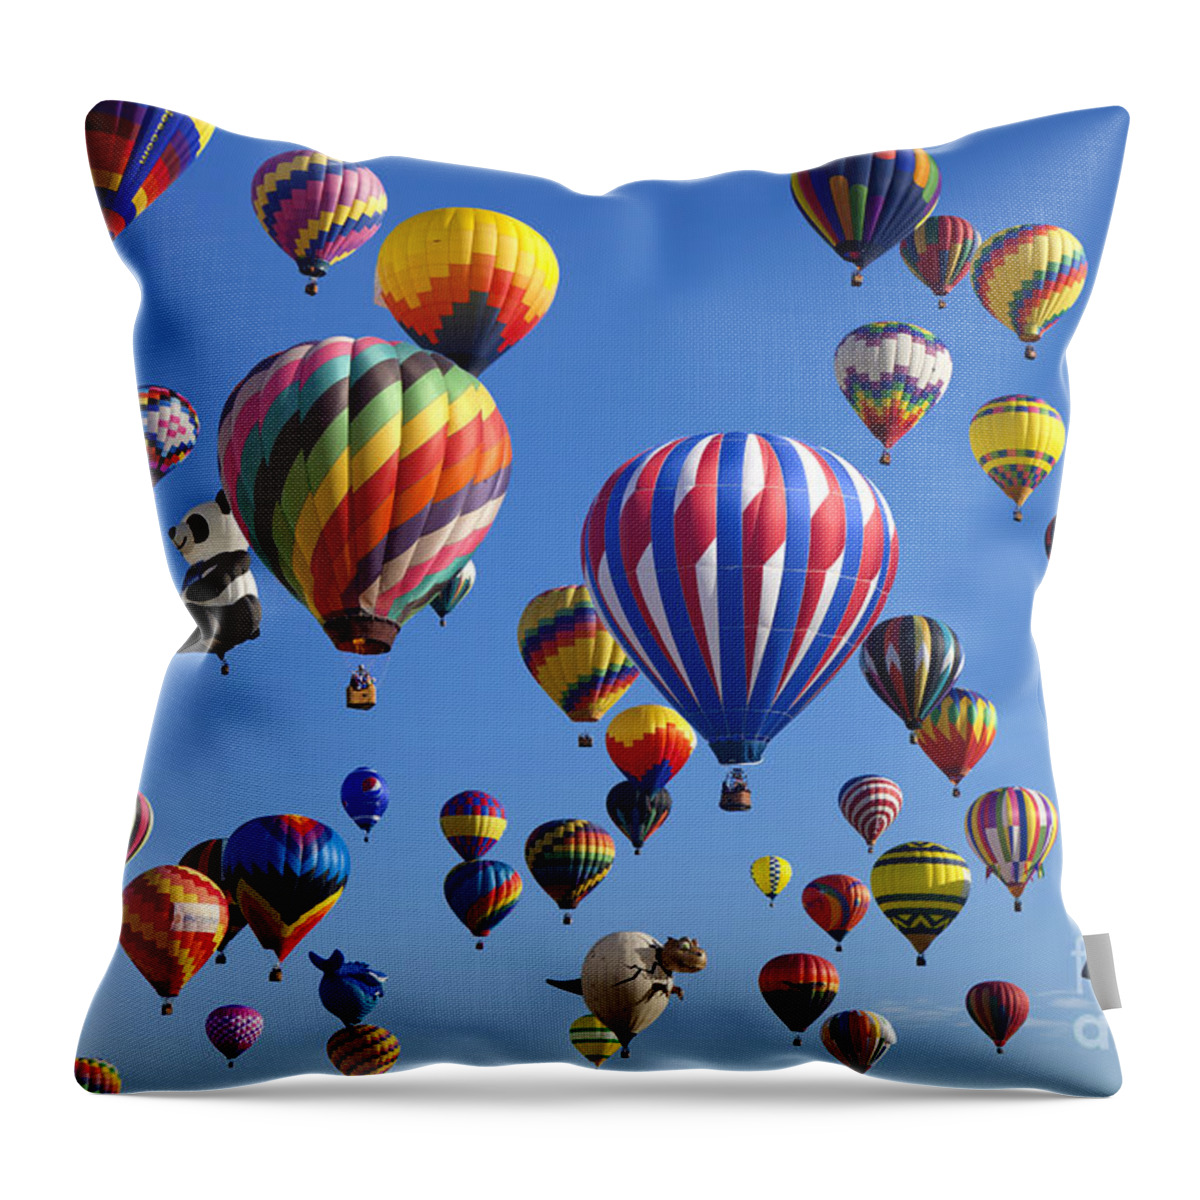 Hot Air Balloon Throw Pillow featuring the photograph Ballooning Festival by Anthony Totah